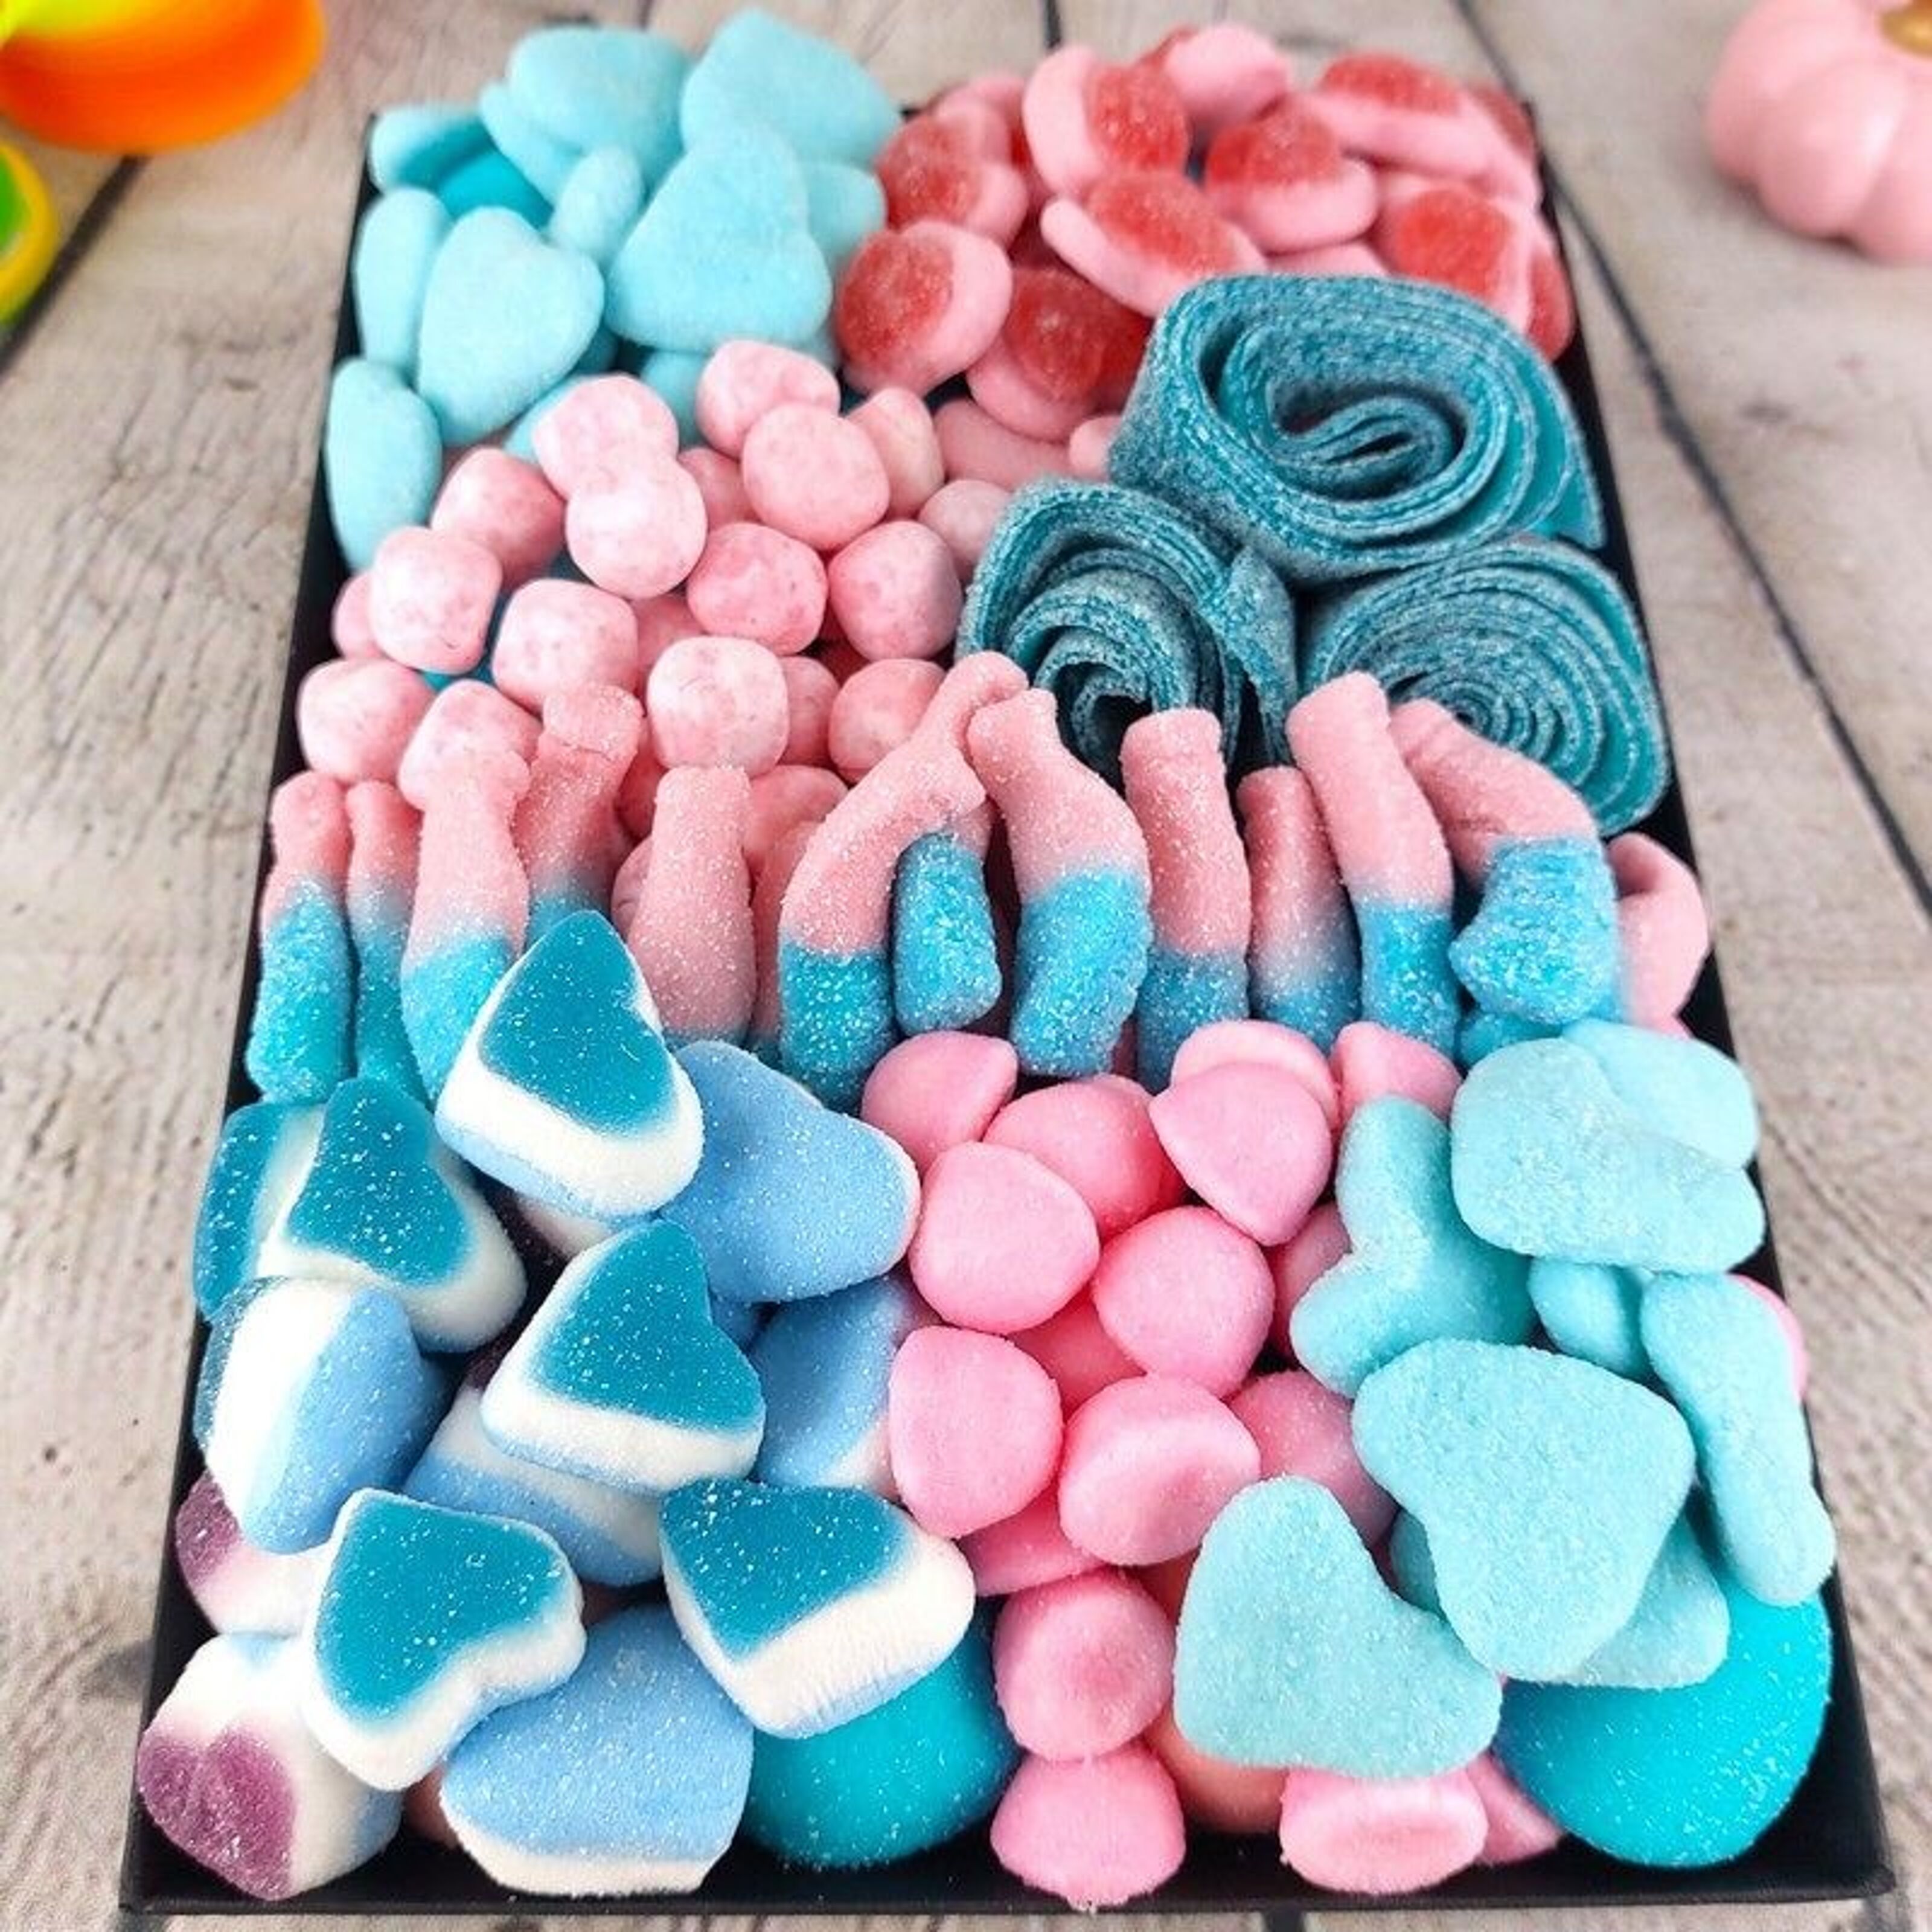 Buy wholesale Pink and blue candy tray - Candy Board